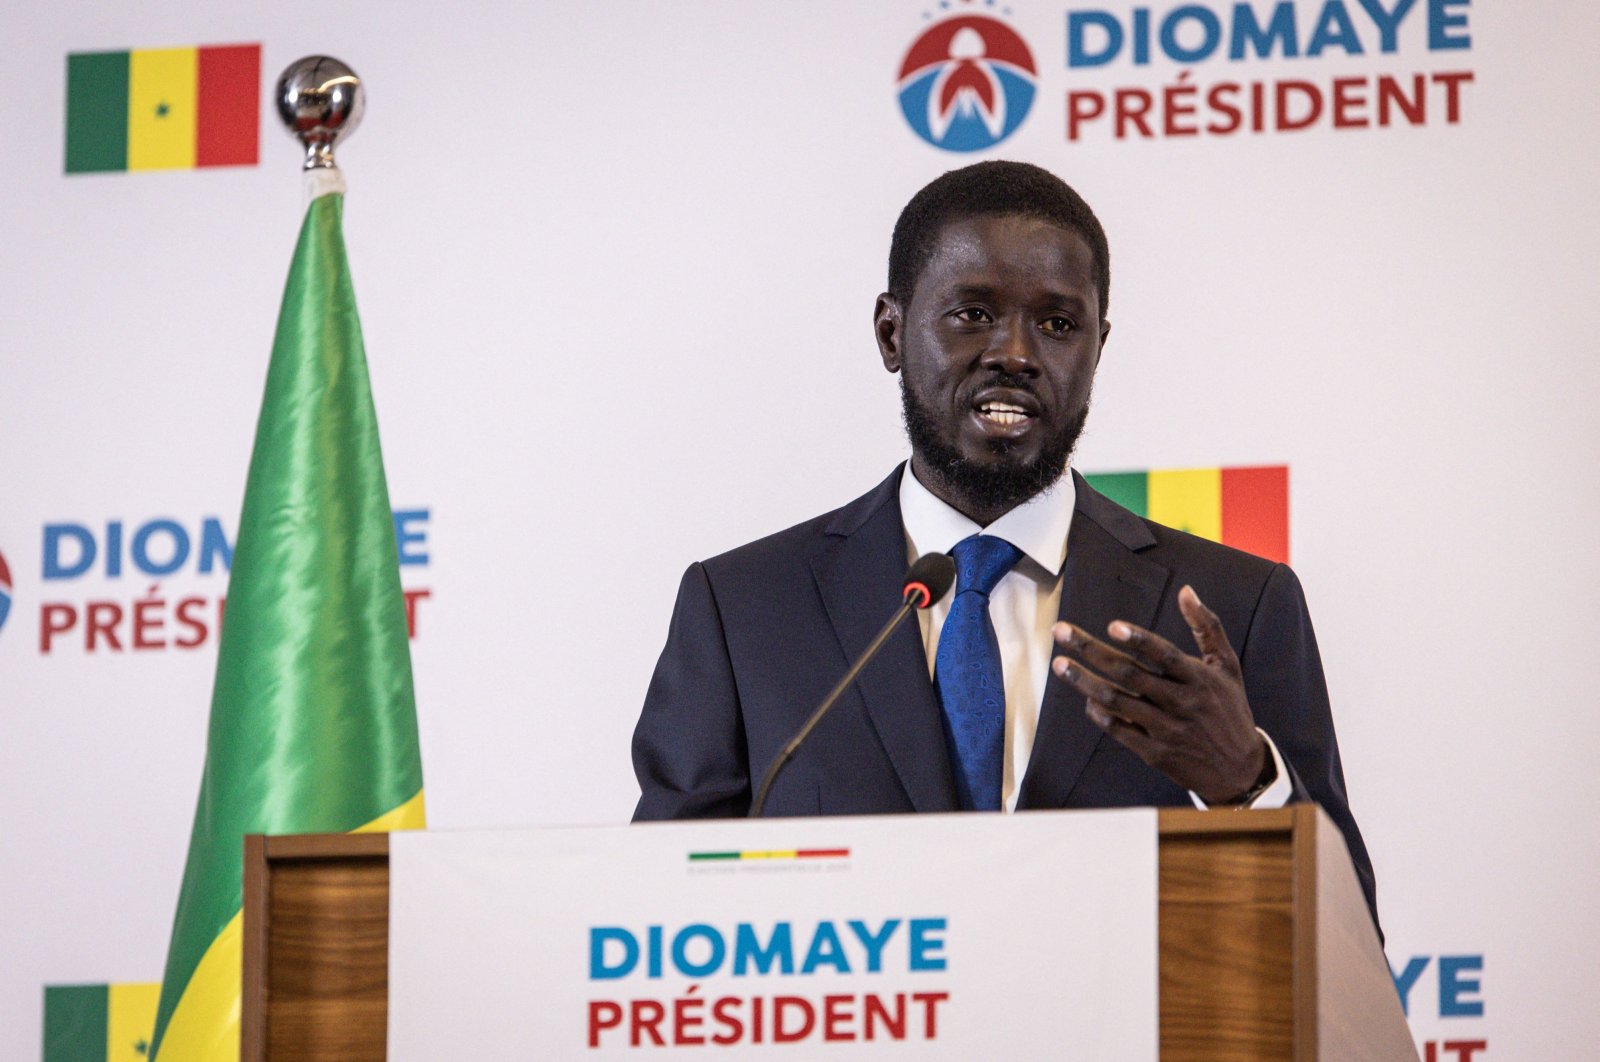 Senegalese opposition presidential candidate Bassirou Diomaye Faye addresses the media in Dakar, Senegal, March 25, 2024. (AFP Photo)